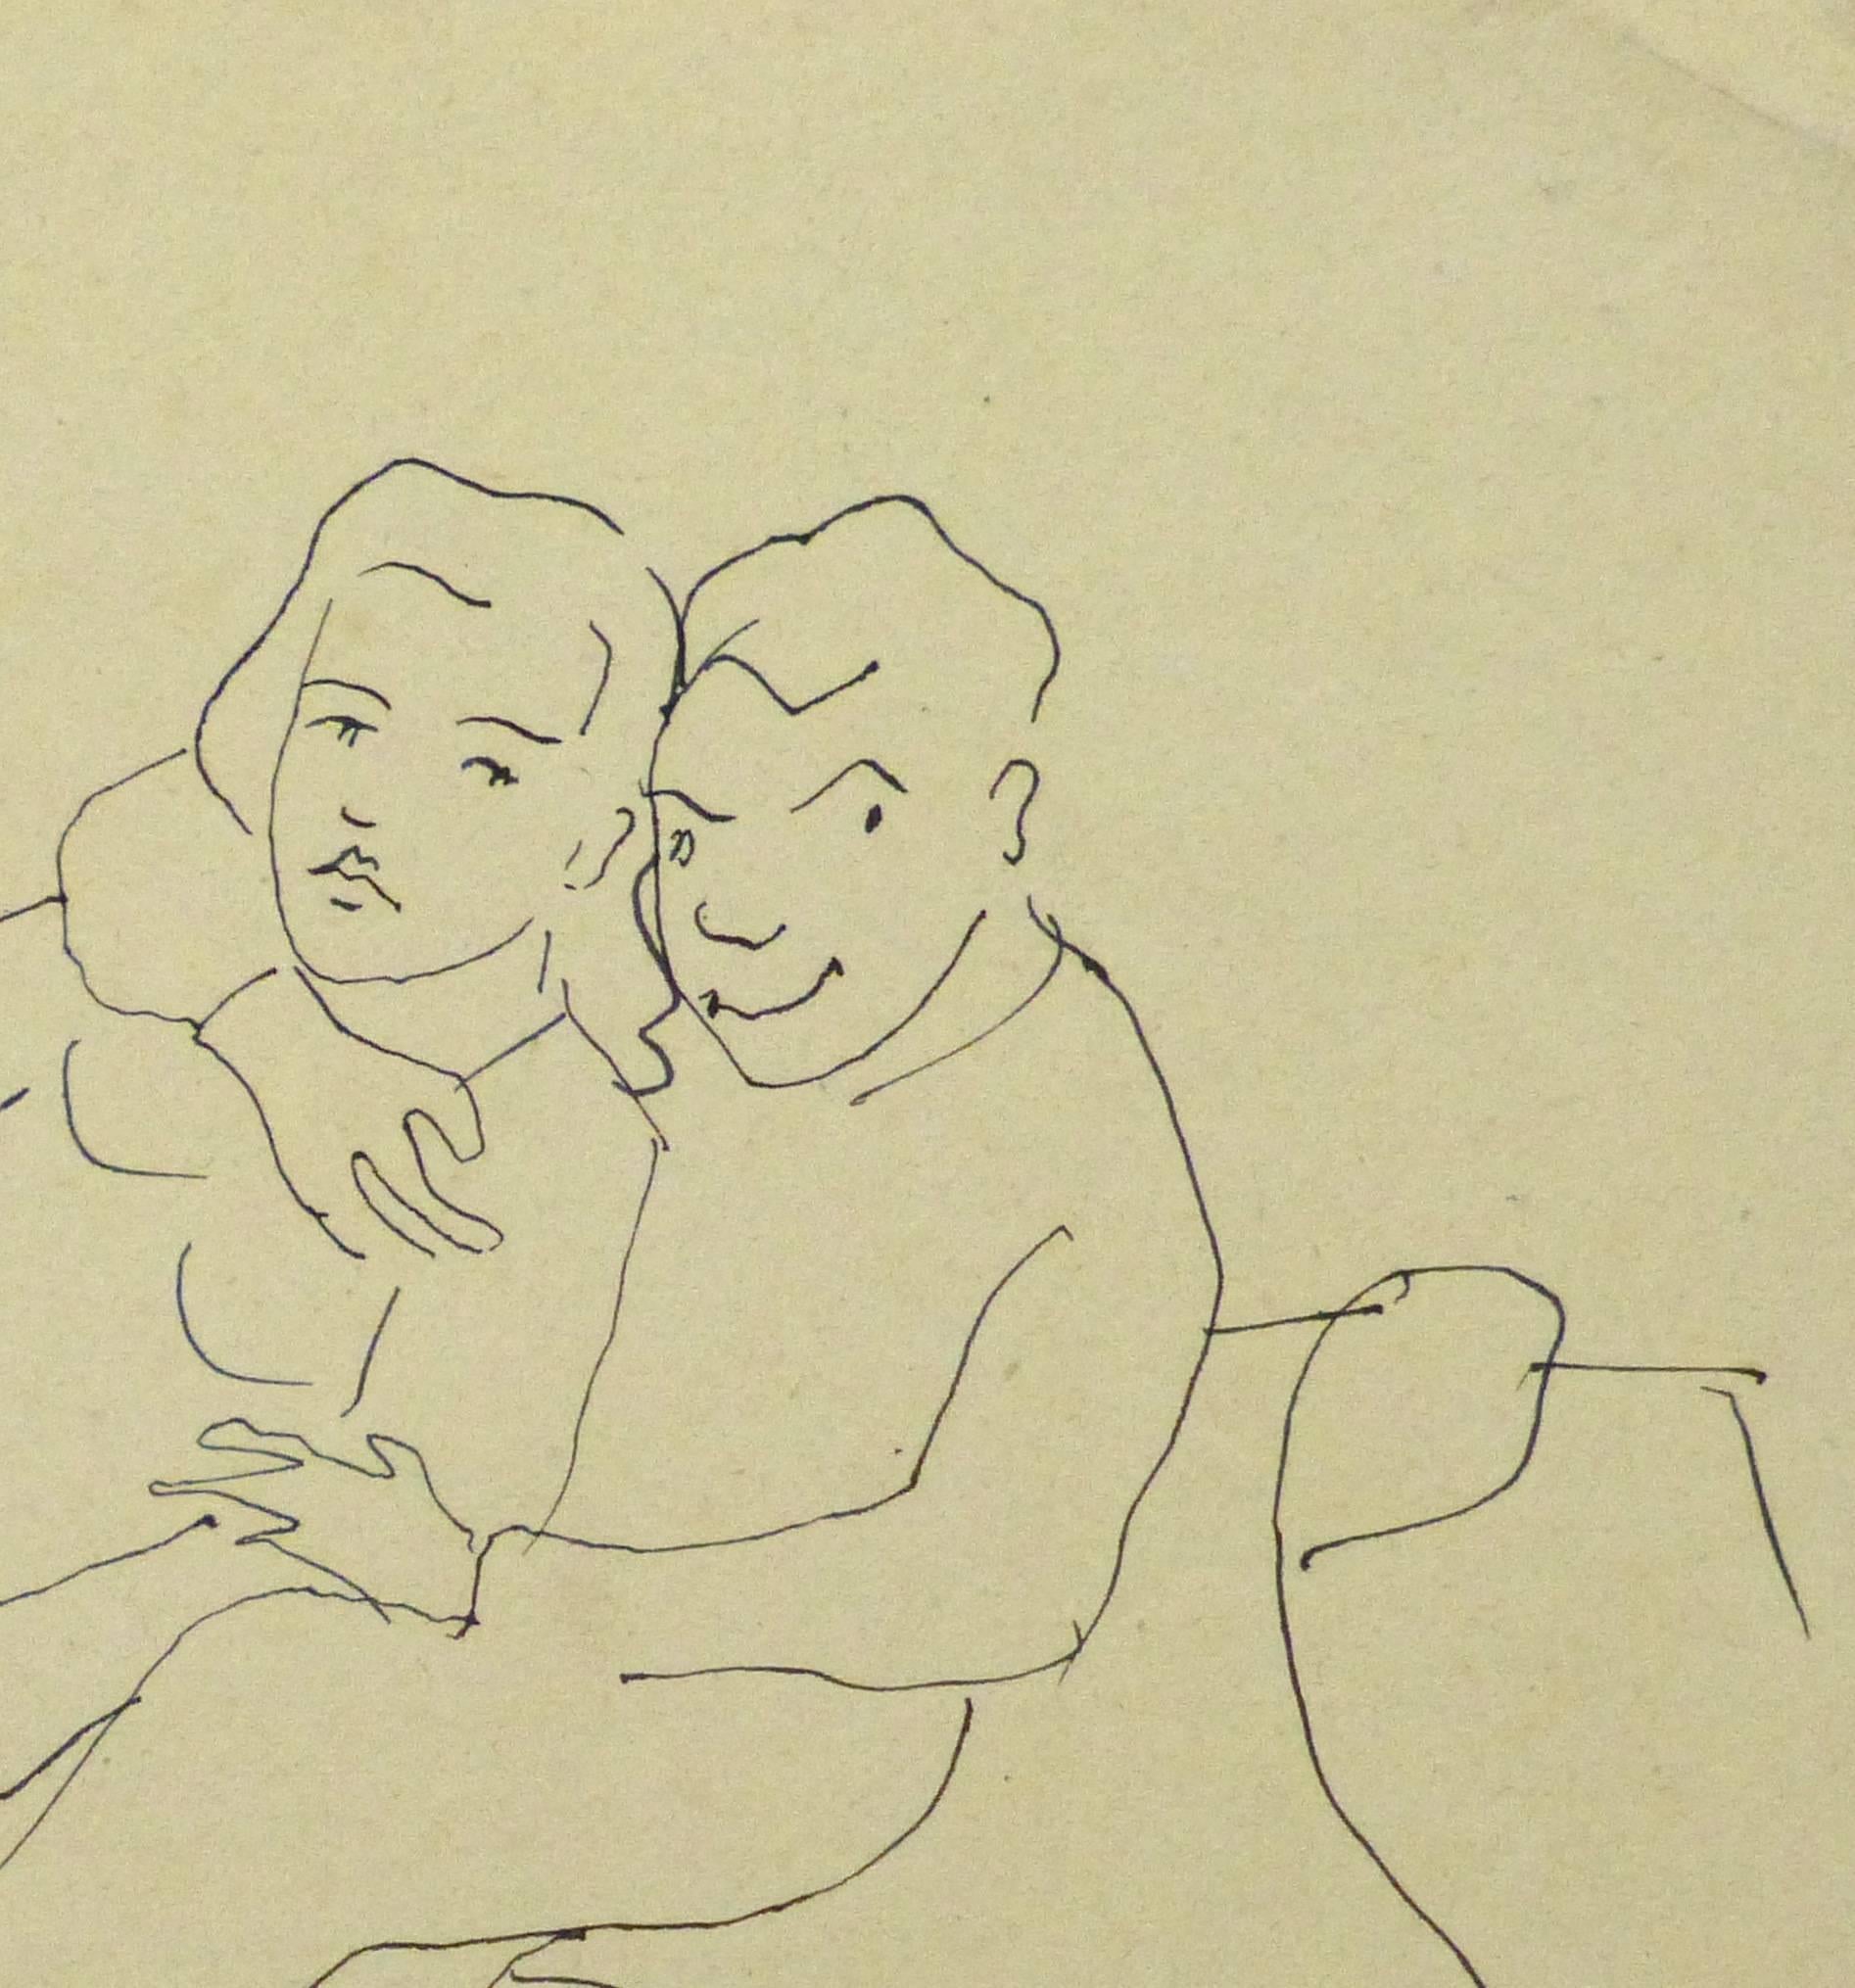 Vintage Pen & Ink Sketch - Close Couple - Art by Jean-Charles Lauthe